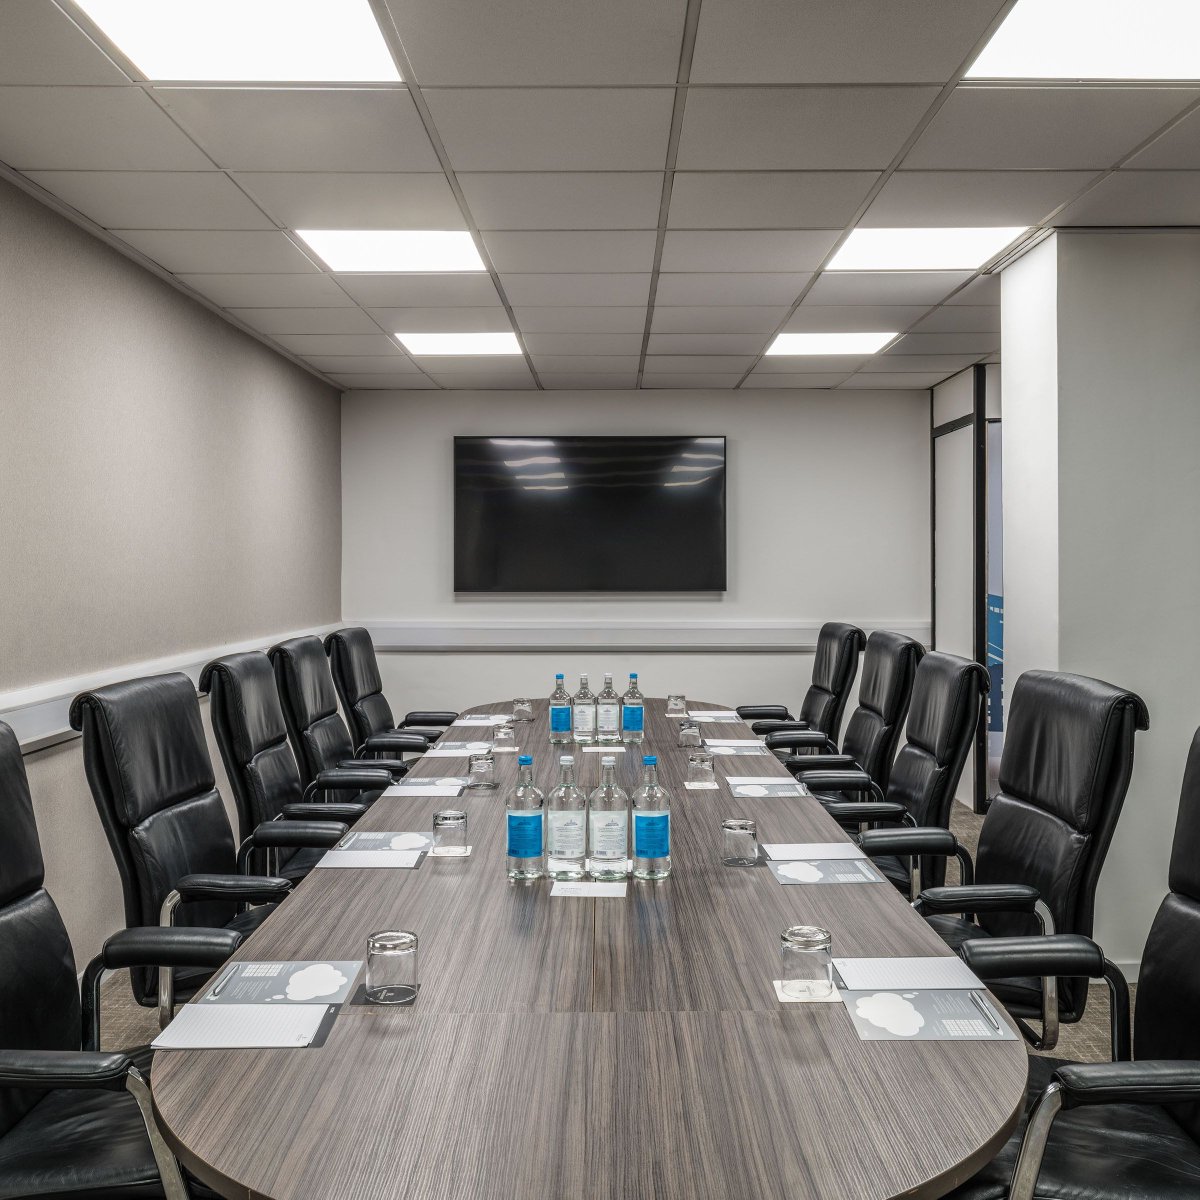 Our recently renovated venue offers an elevated meetings experience, meticulously designed to make a long lasting impact on your guests. Contact us today at events@renaissanceheathrow.co.uk to get started. #Conferences #Events #Group #EventPlanning #Company